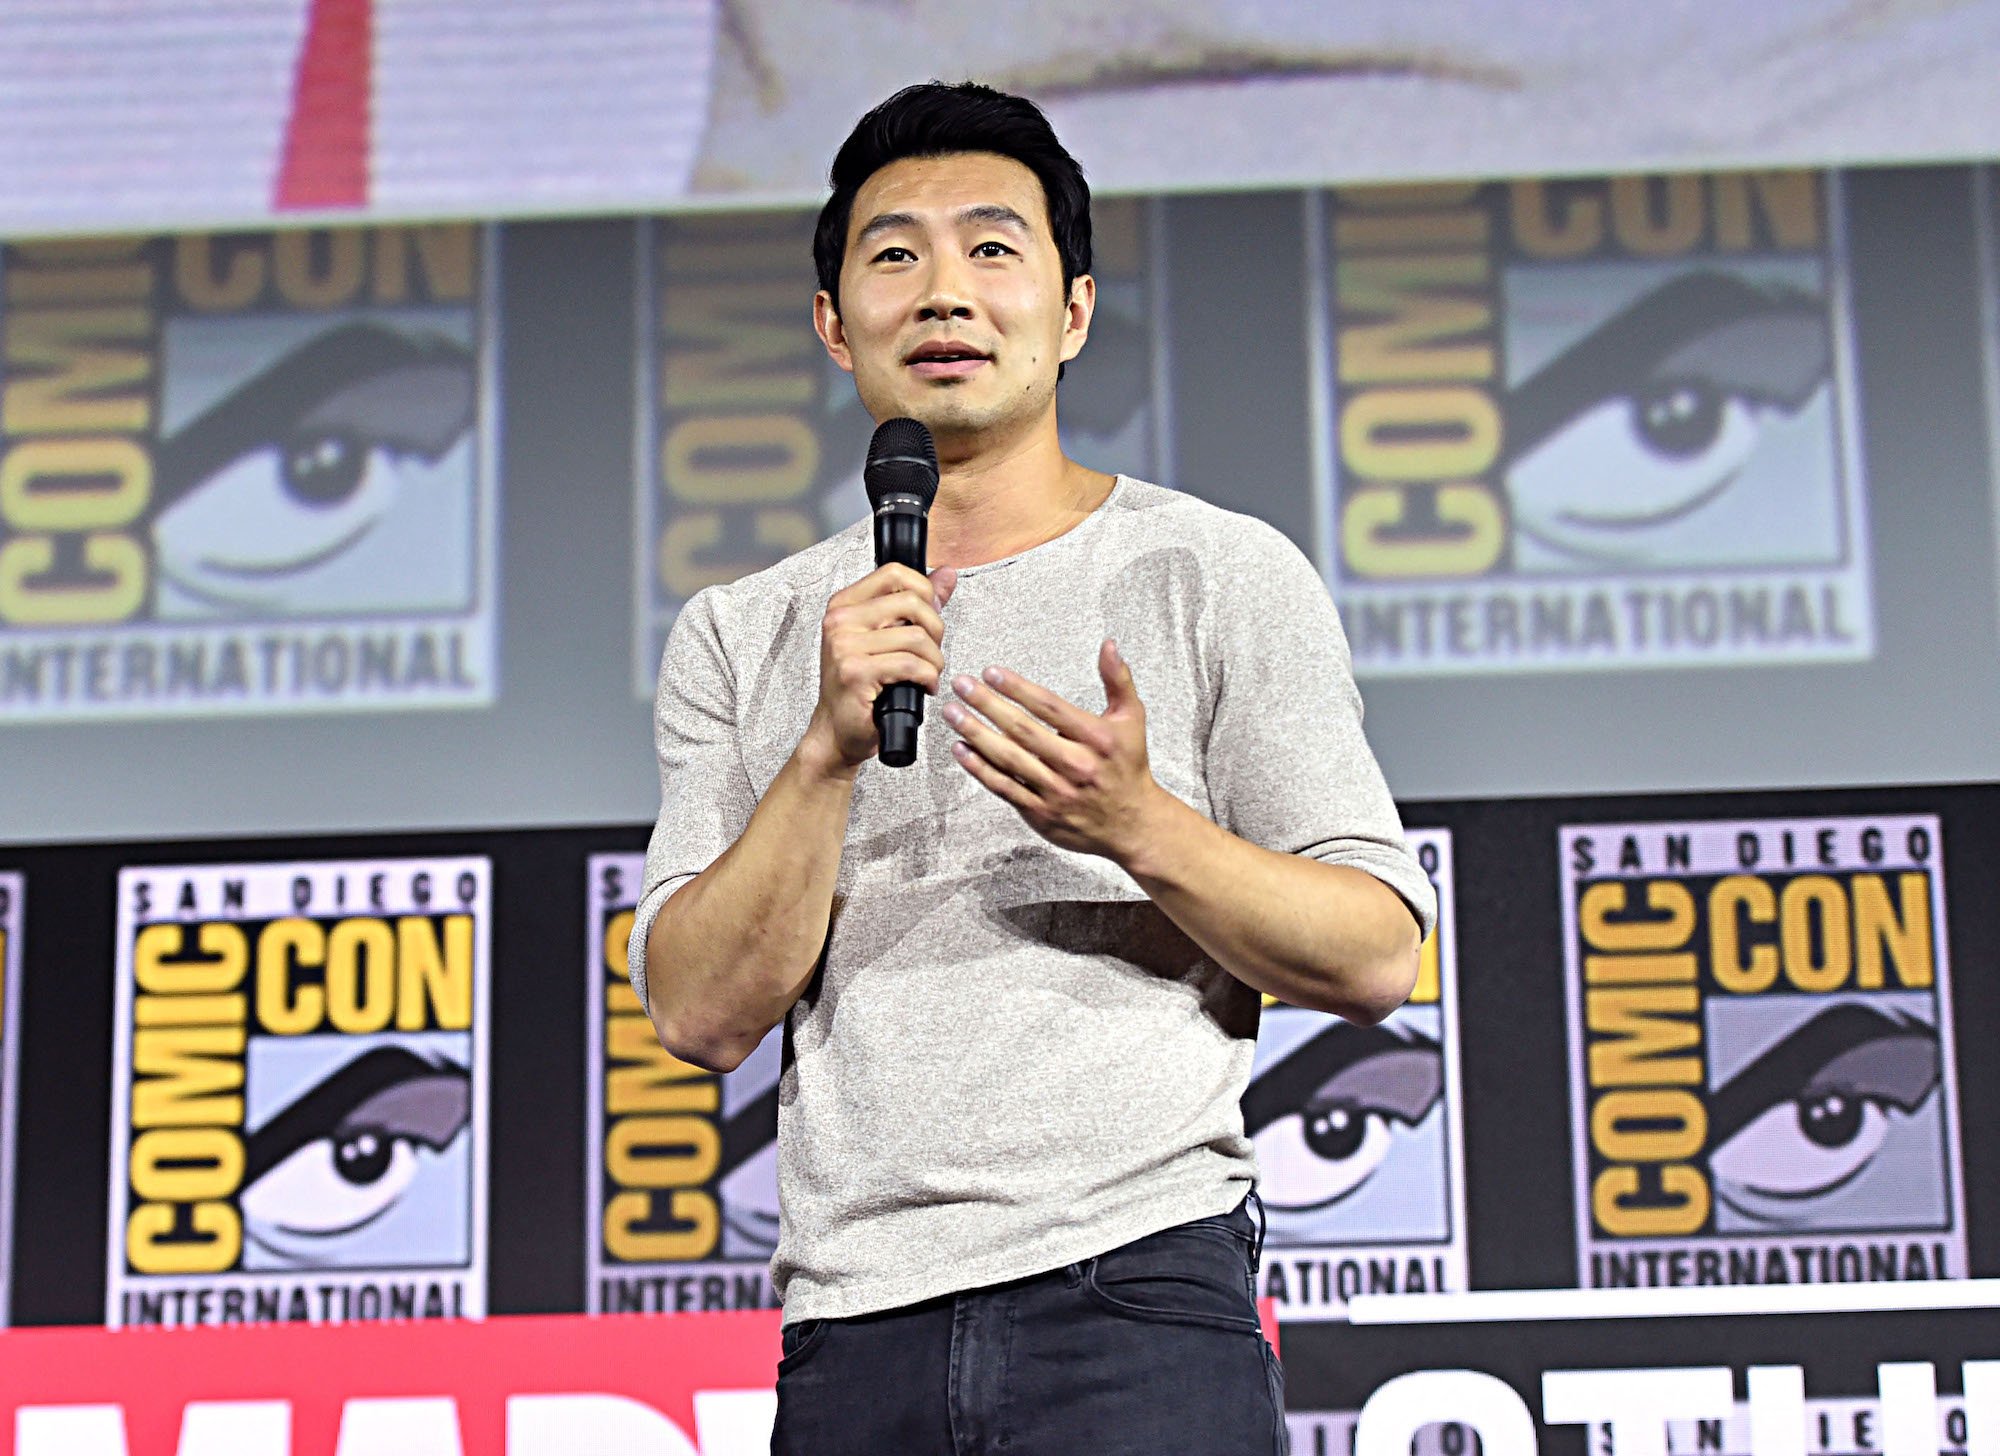 Simu Liu in front of a Comic Con background, speaking into a microphone